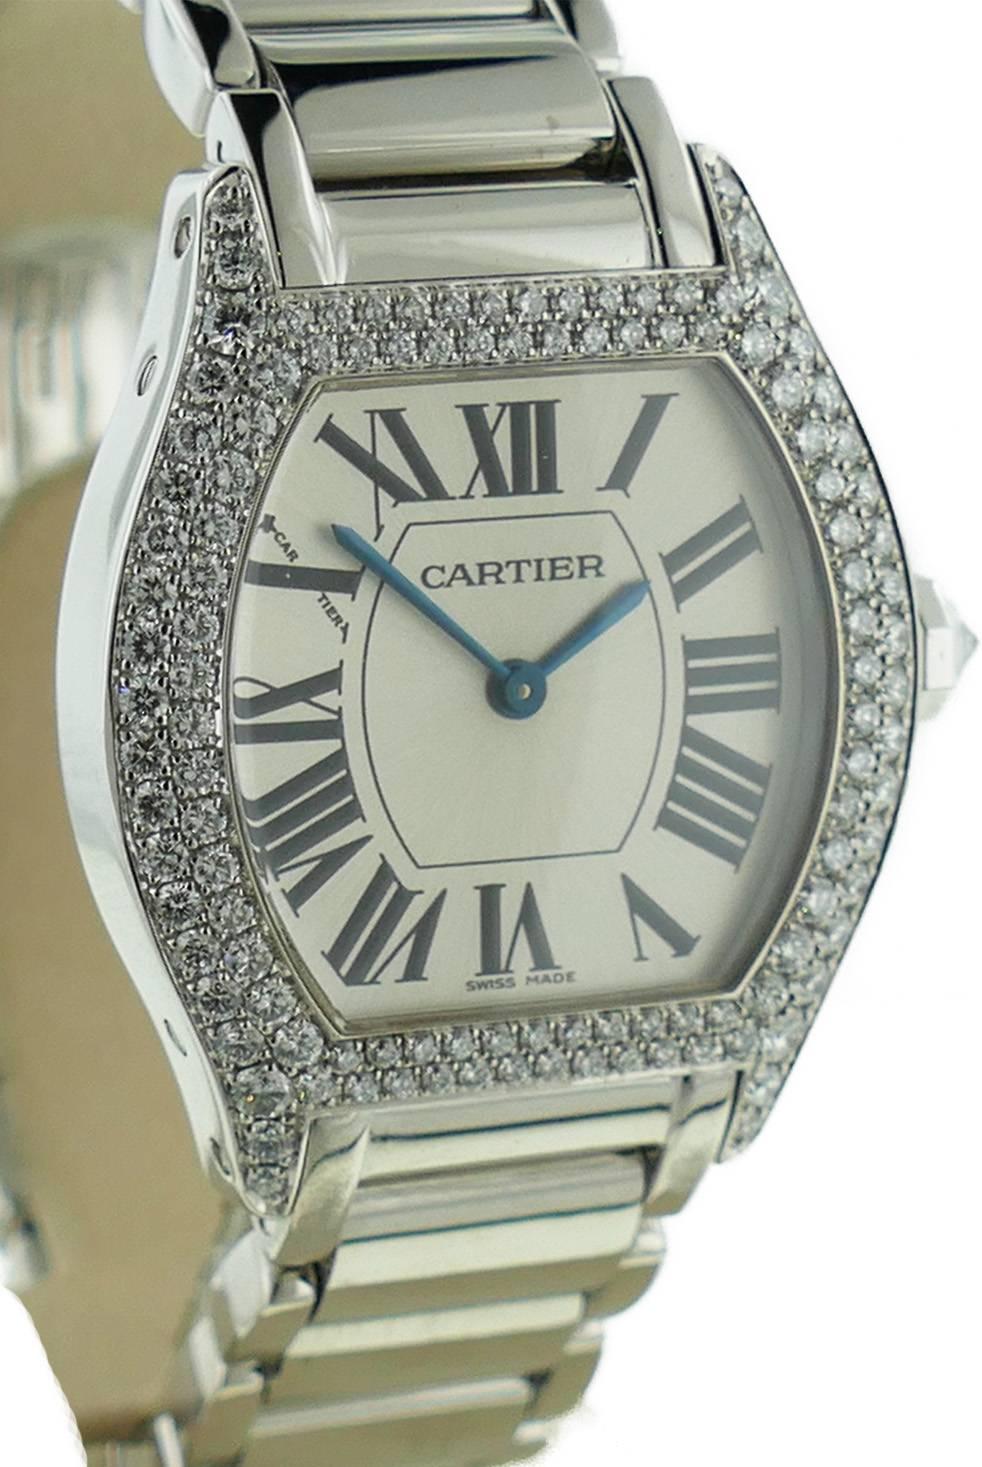  Ladies (28x35mm) Cartier Tortue 18k White Gold Factory Diamond Double Row Bezel Watch on a Bracelet. The Watch is in Good Condition & Keeping Great Time; Movement is Operated by Mechanical Hand Winding. Included with the Watch is a Cartier Box and